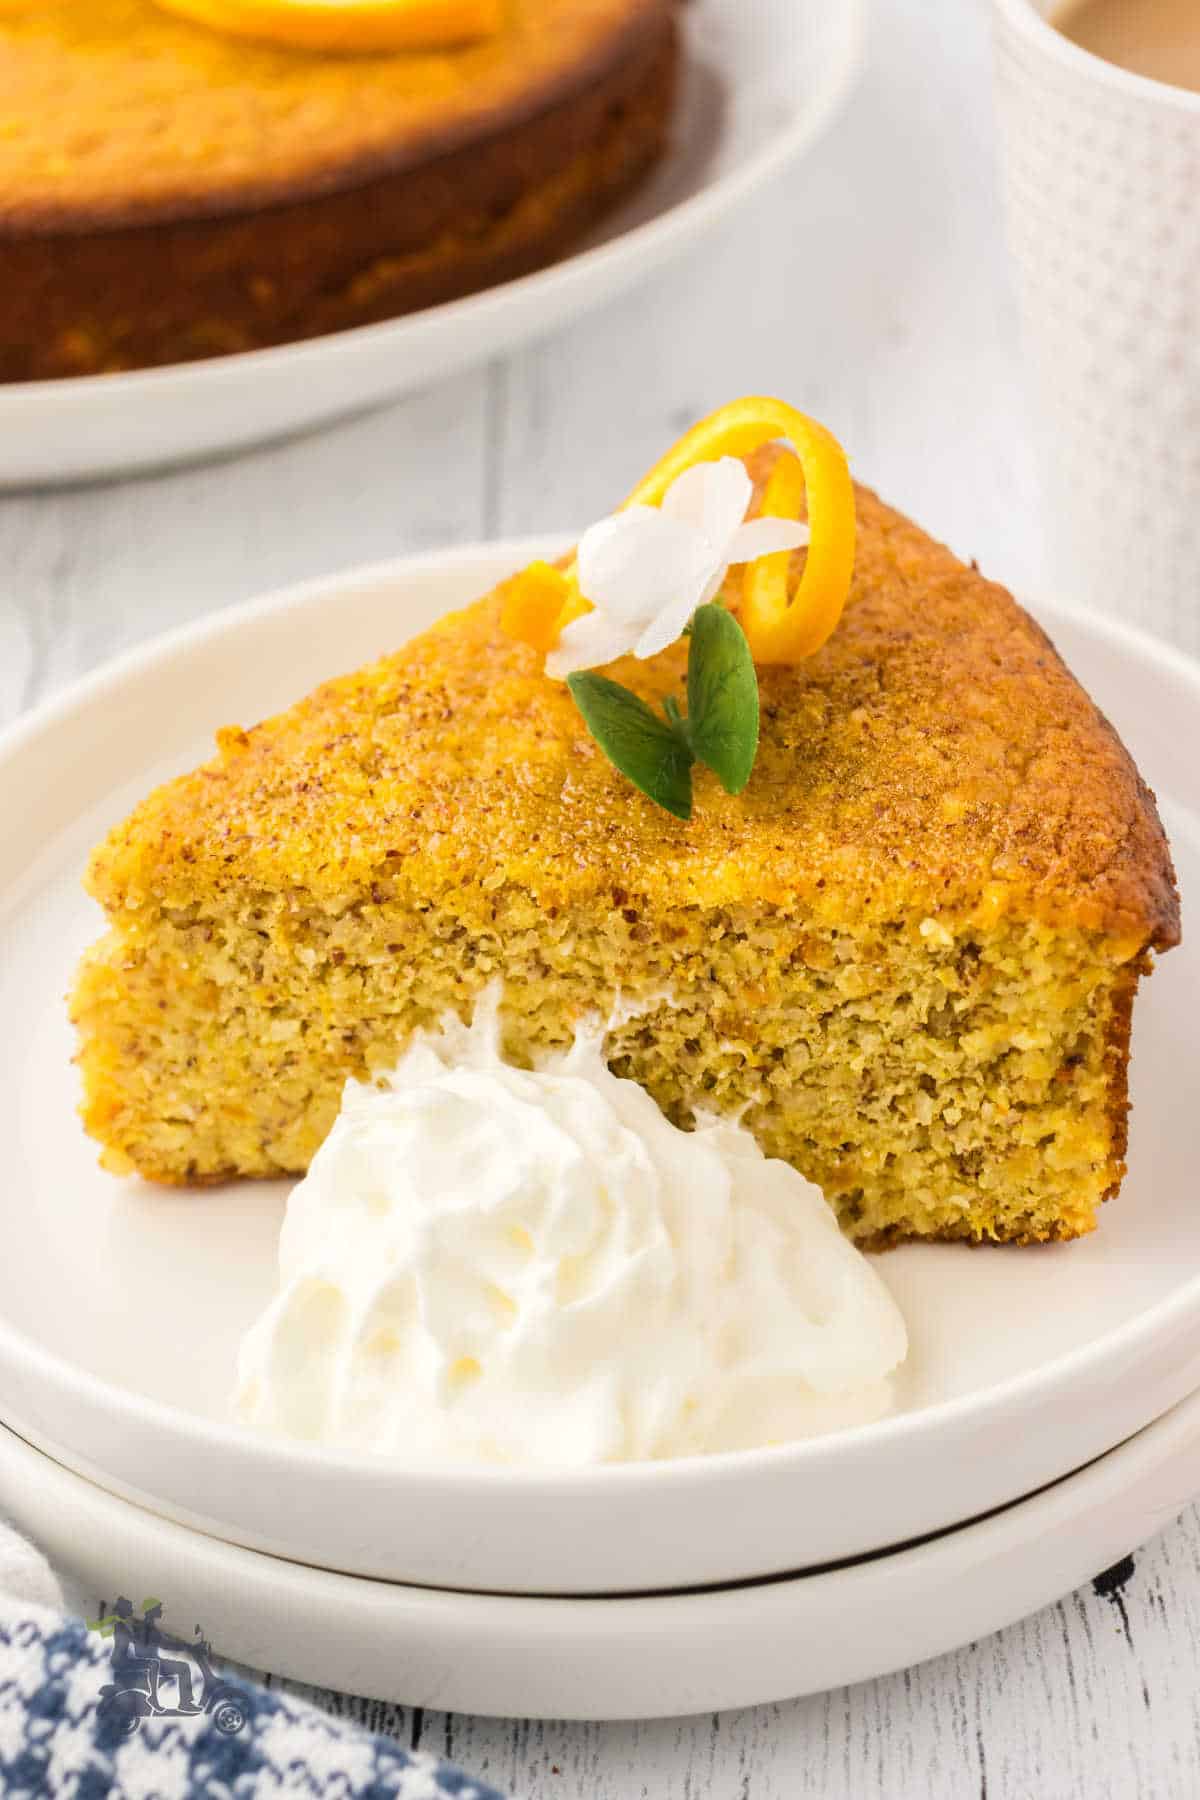 A slice of almond orange cake with whipped cream on the side. 